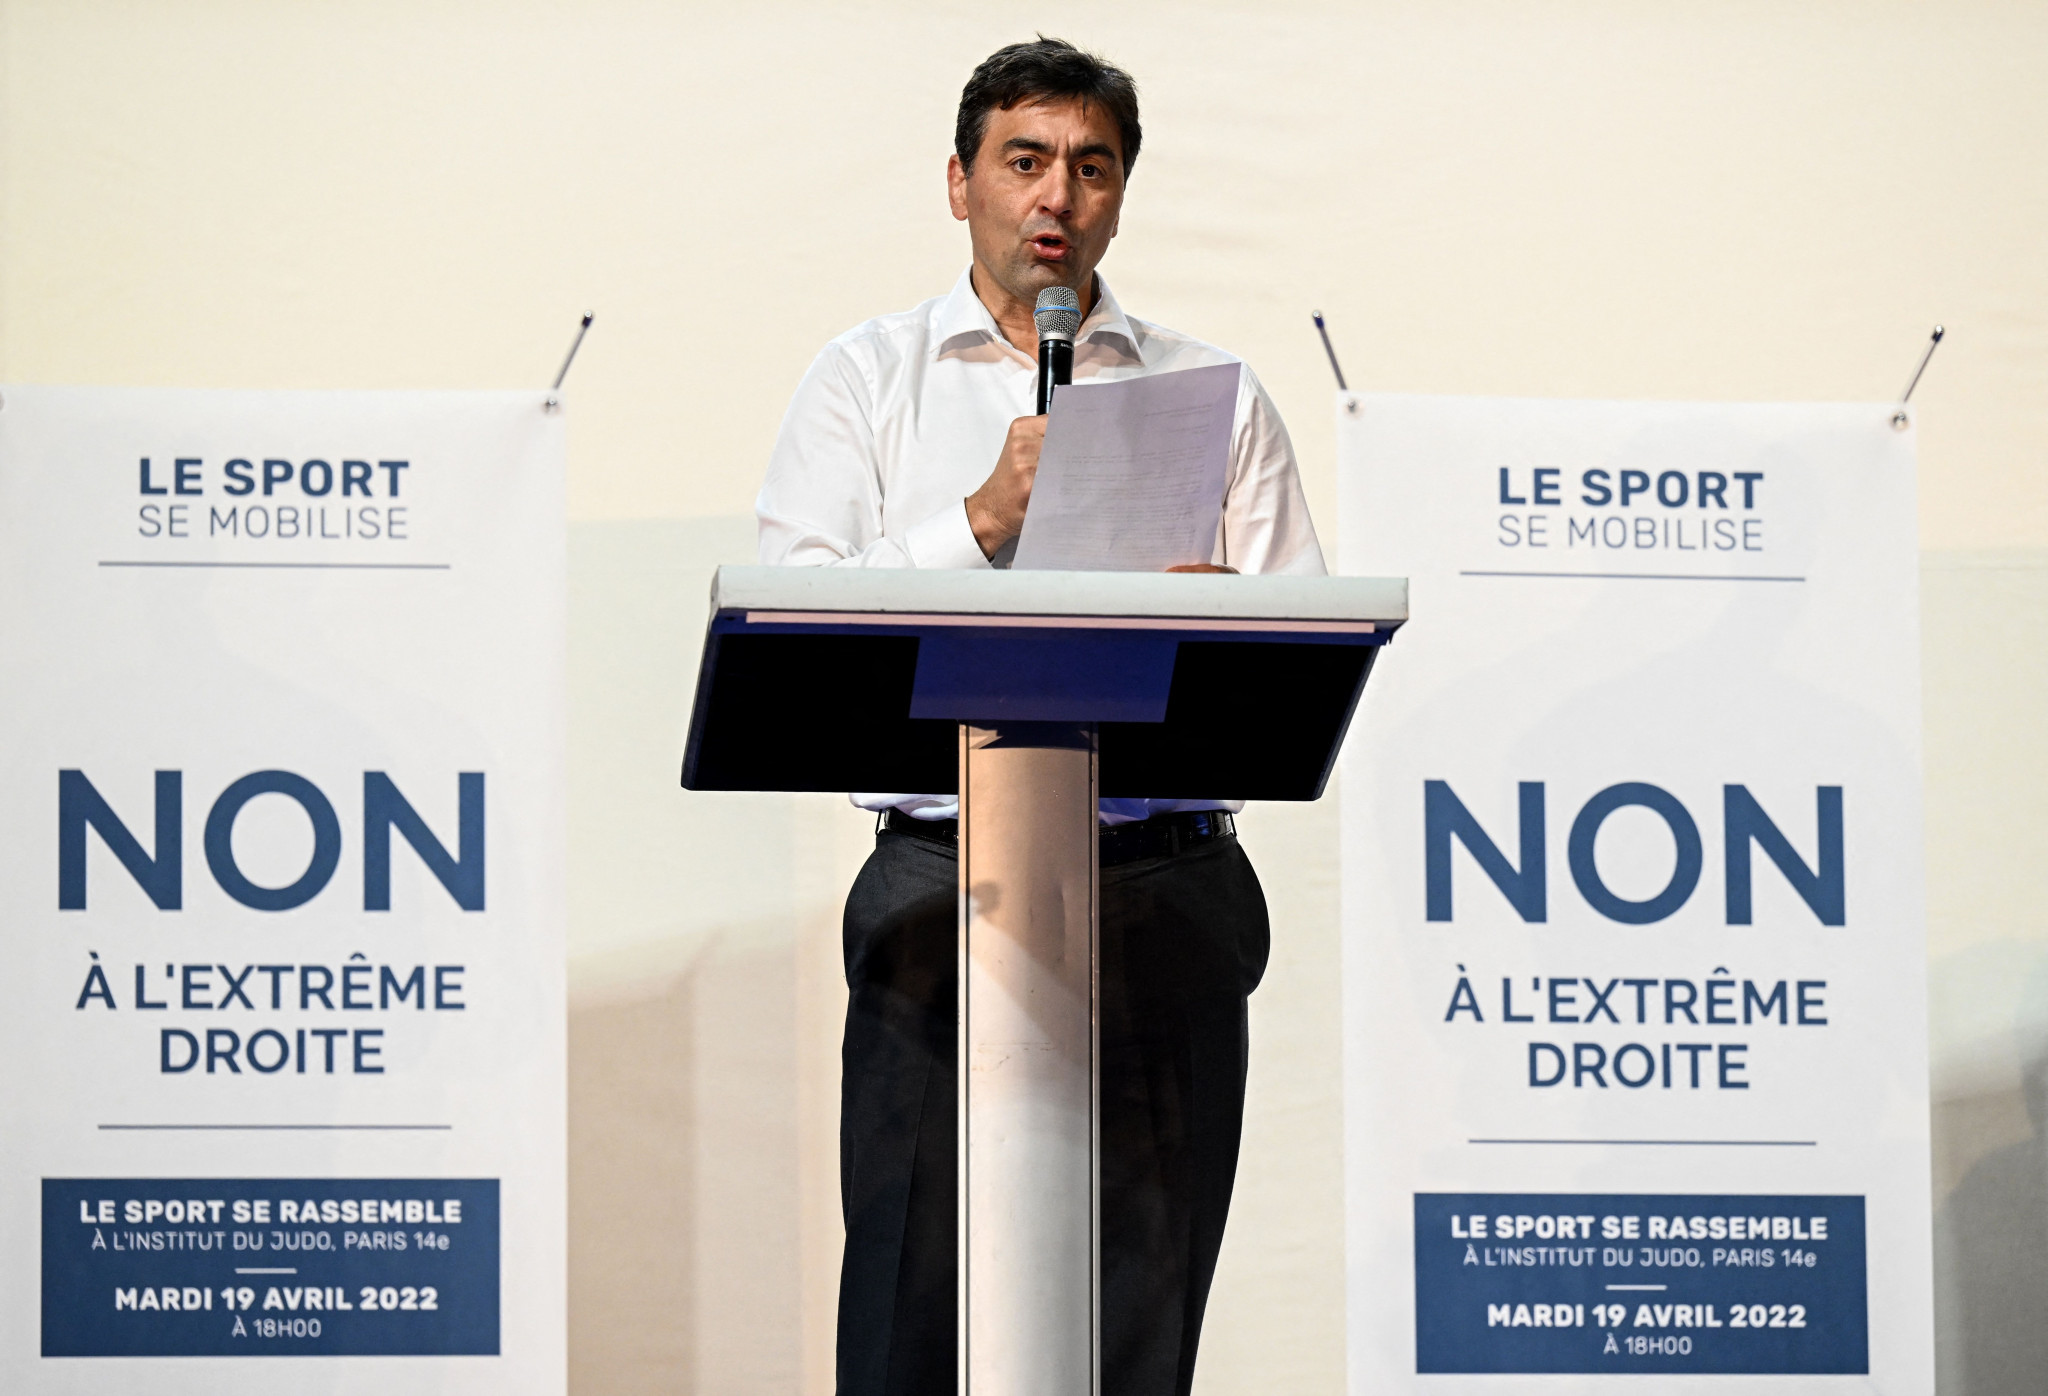 France Judo President Stéphane Nomis said he was "very disappointed" that he was not consulted prior to Nathalie Péchalat's appointment ©Getty Images